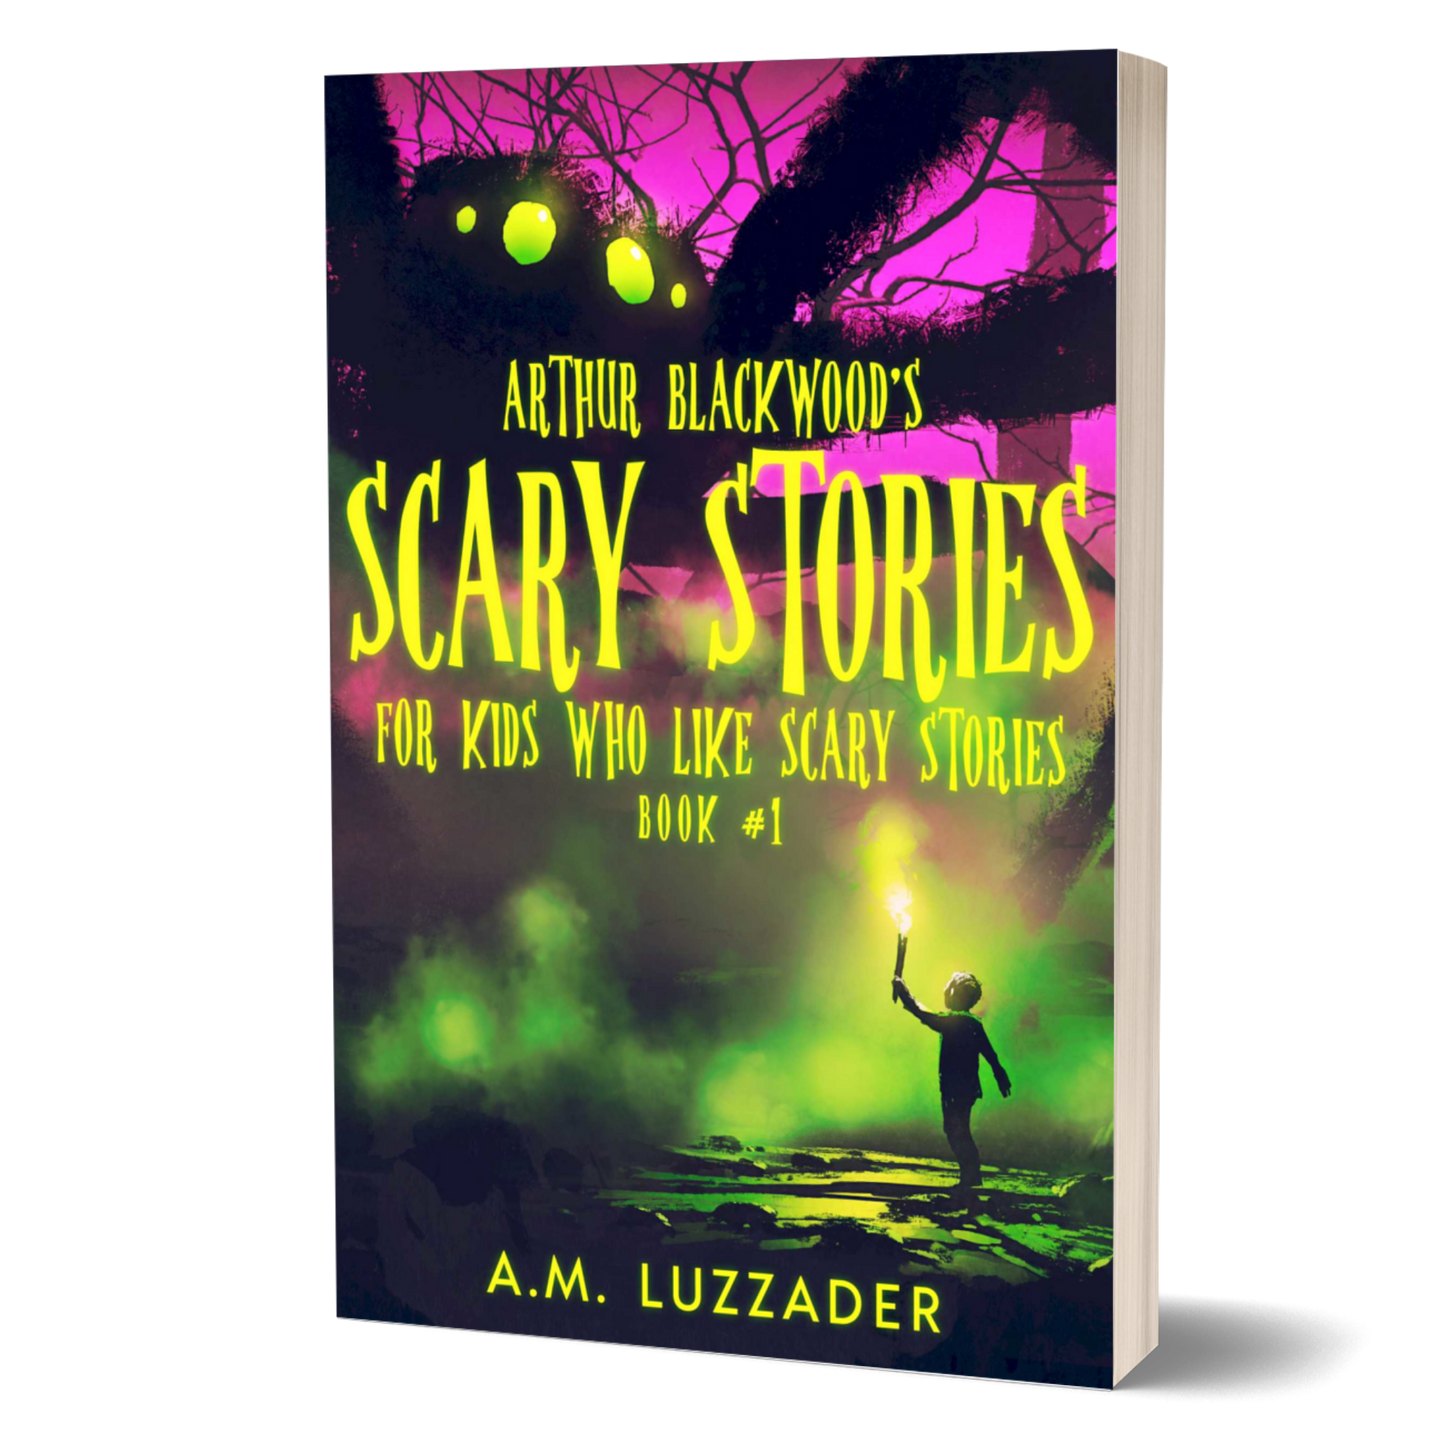 Arthur Blackwood's Scary Stories for Kids Who Like Scary Stories: Book 1